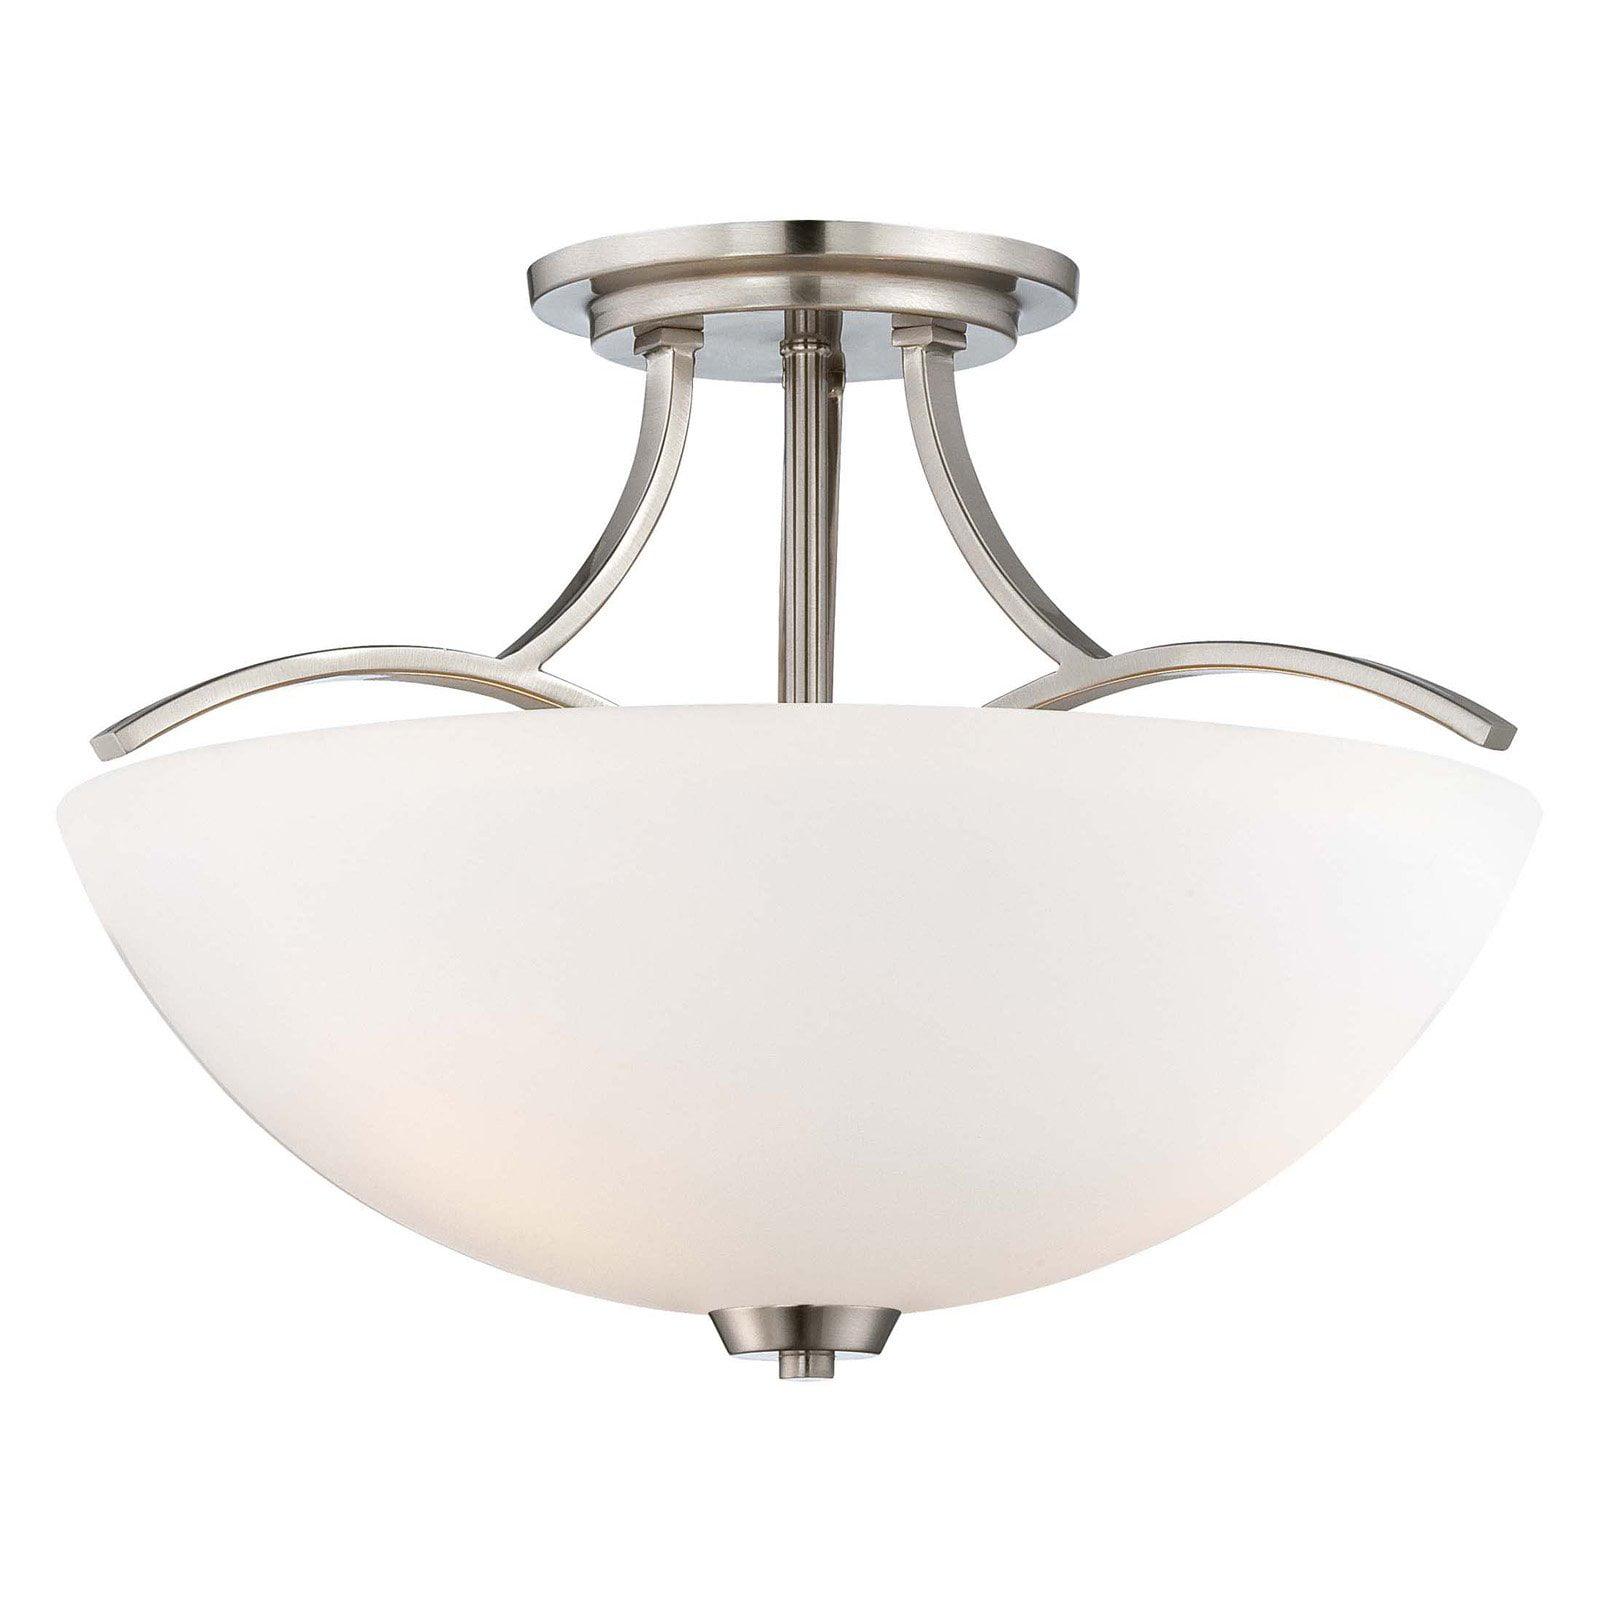 Overland Park Brushed Nickel 3-Light Semi-Flush Mount with Etched White Glass